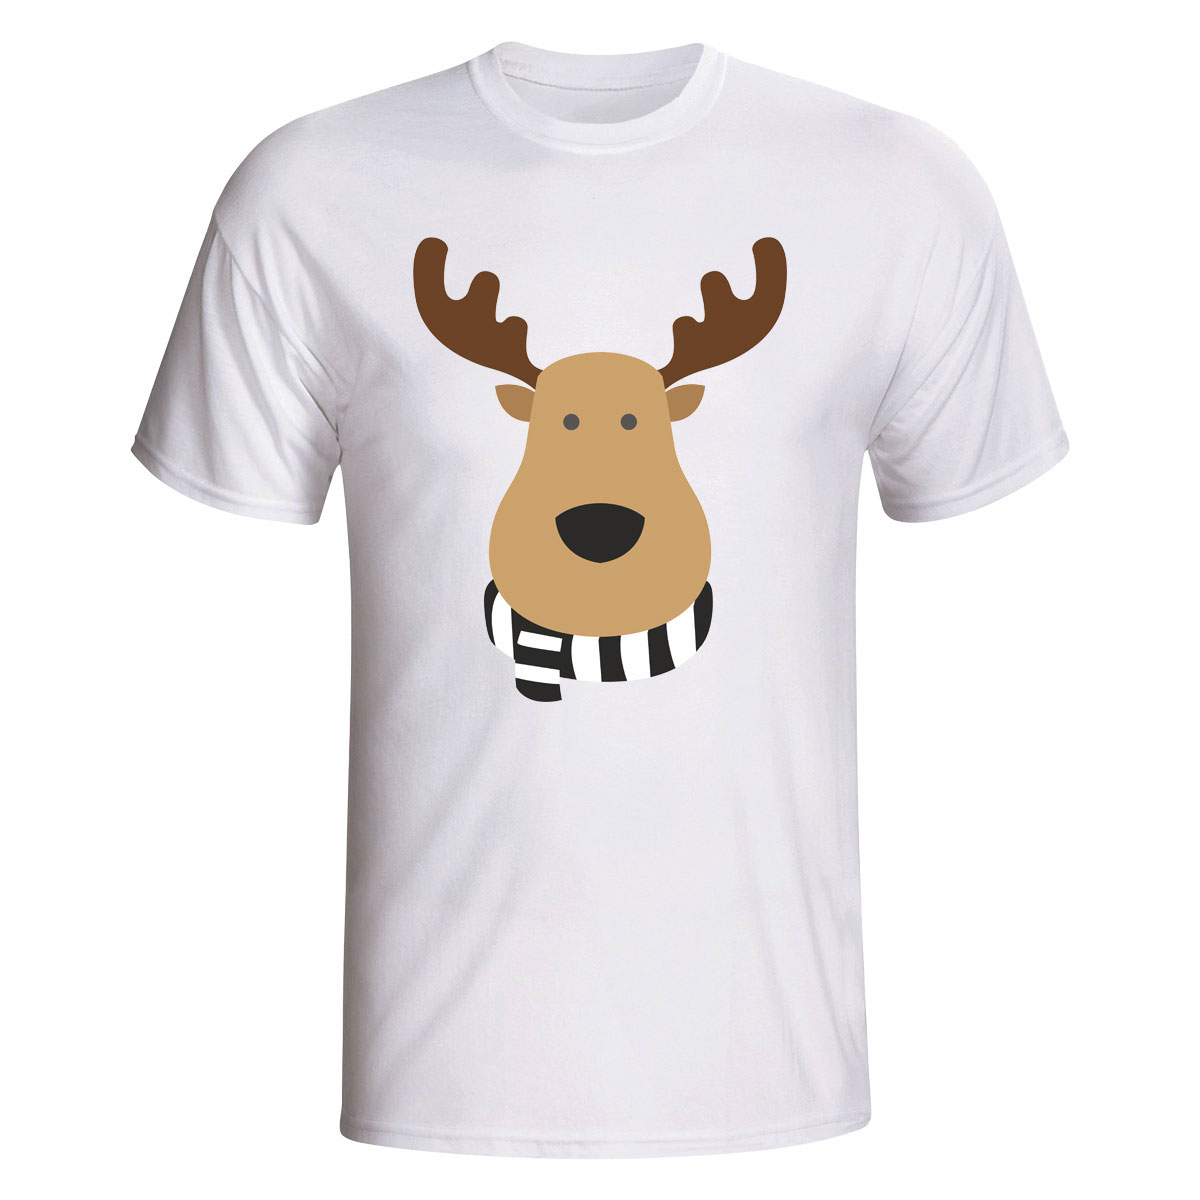 Swansea City Rudolph Supporters T-shirt (white) - Kids